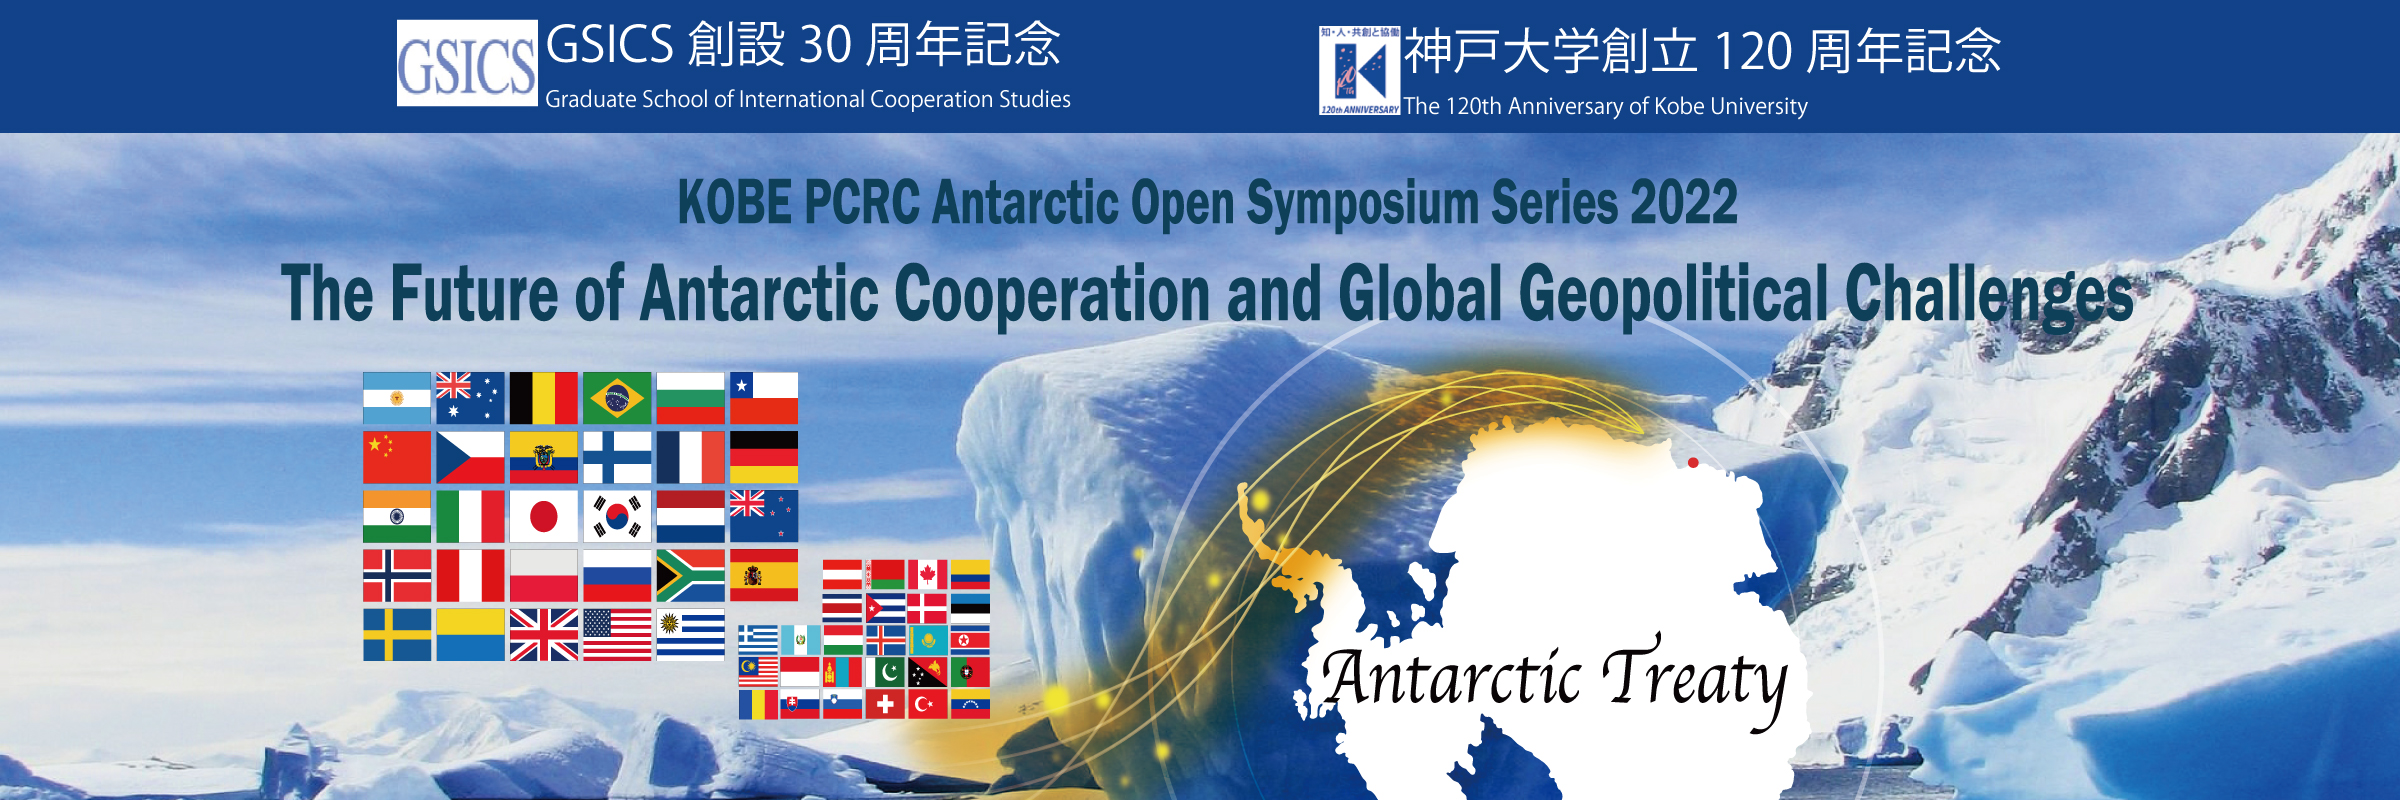 KOBE PCRC Antarctic Open Symposium Series 2022/The Future of Antarctic Cooperation and Global Geopolitical Challenges